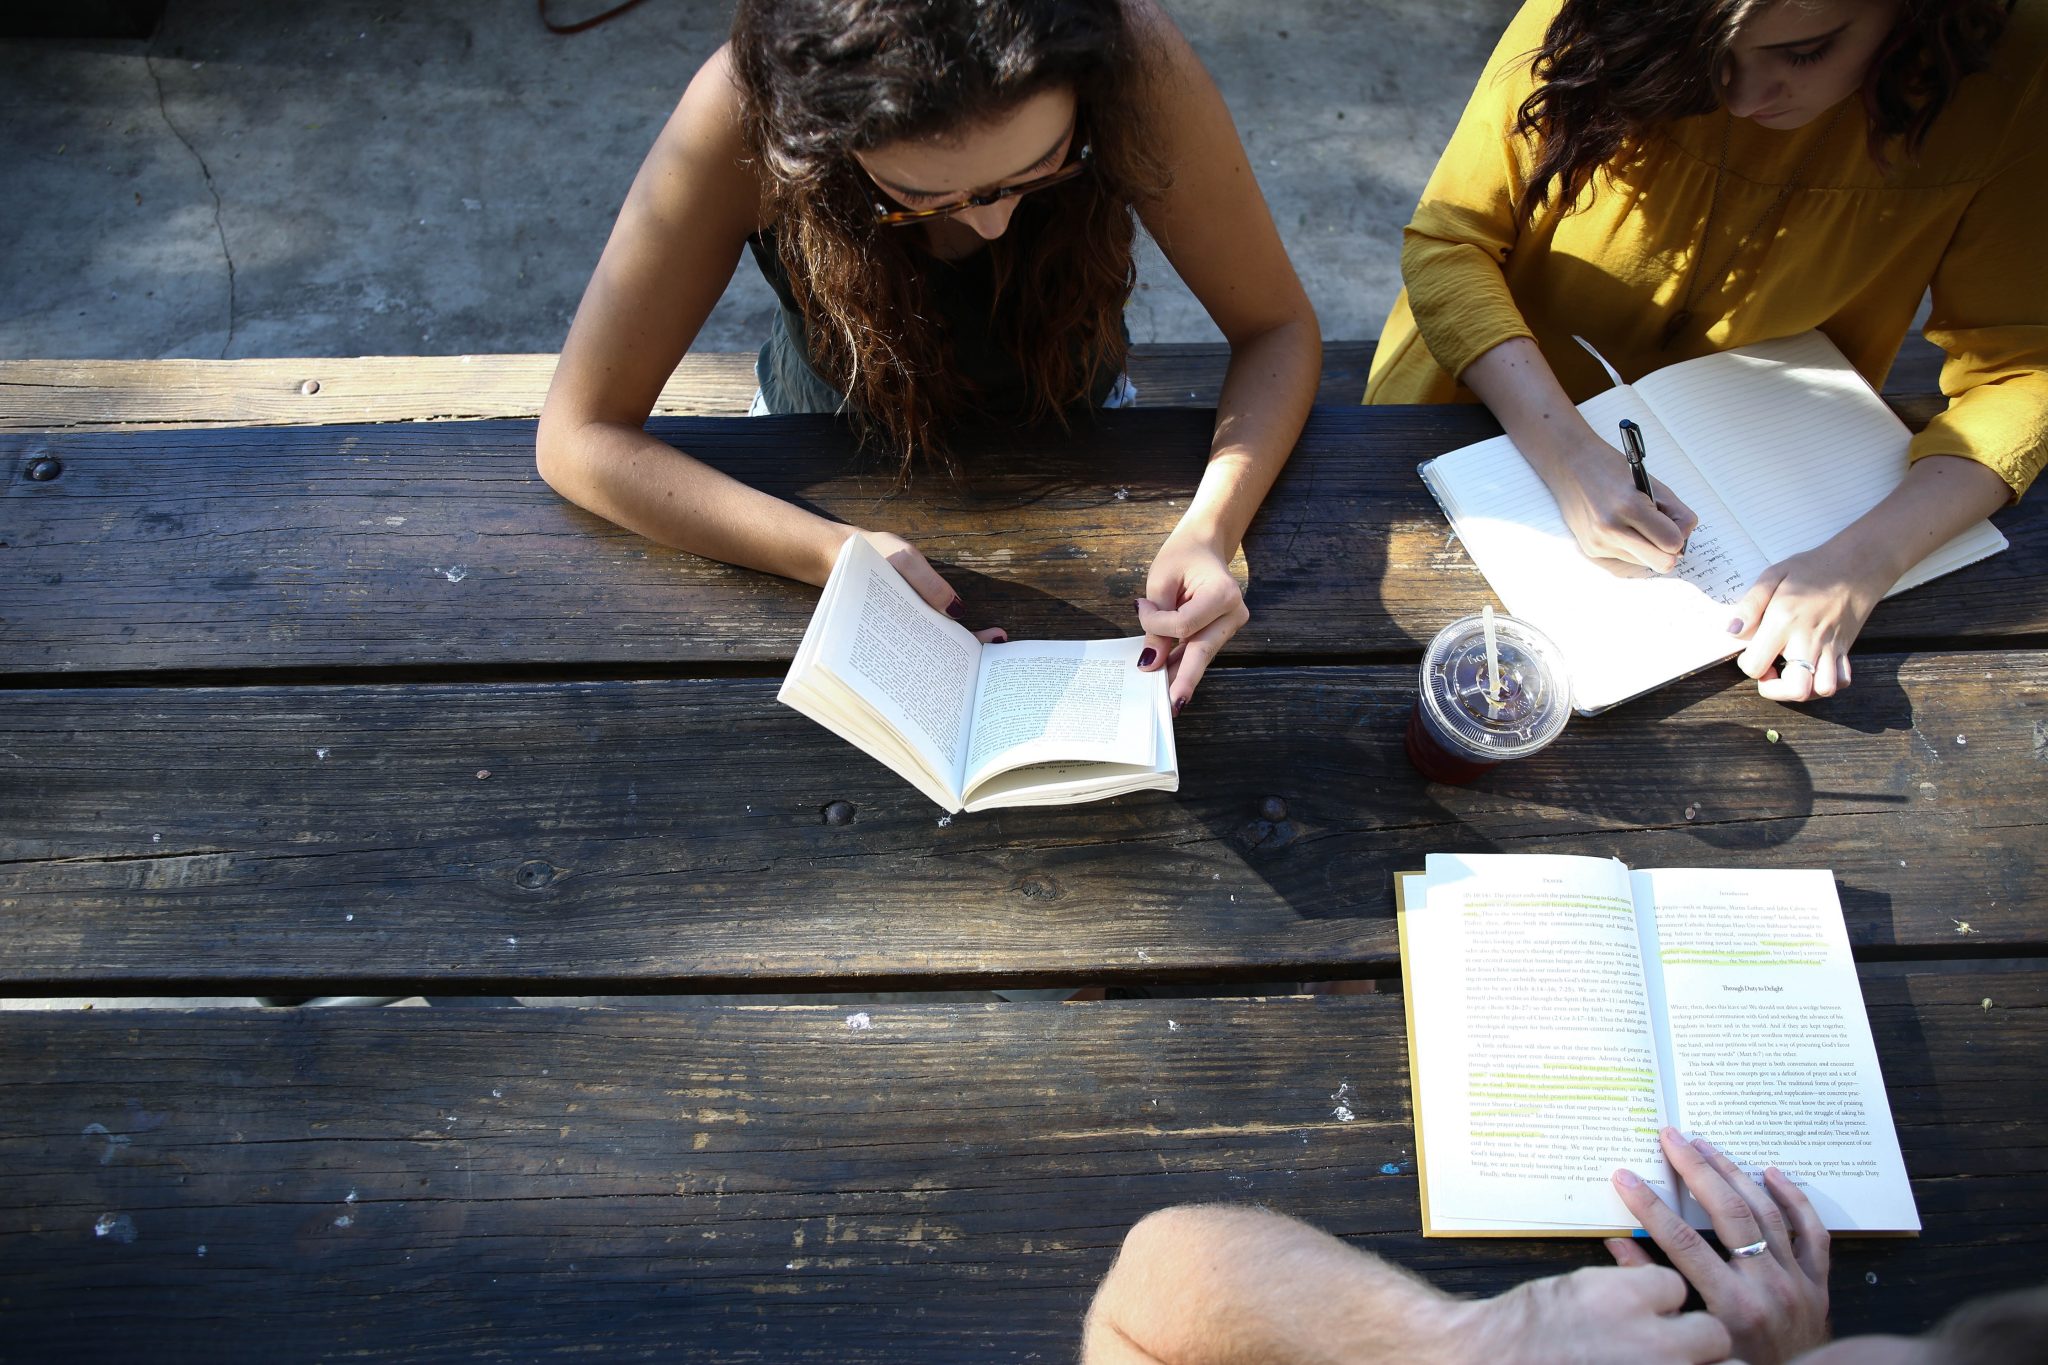 Three humans sit, studying at a picnic table with open books and journals.